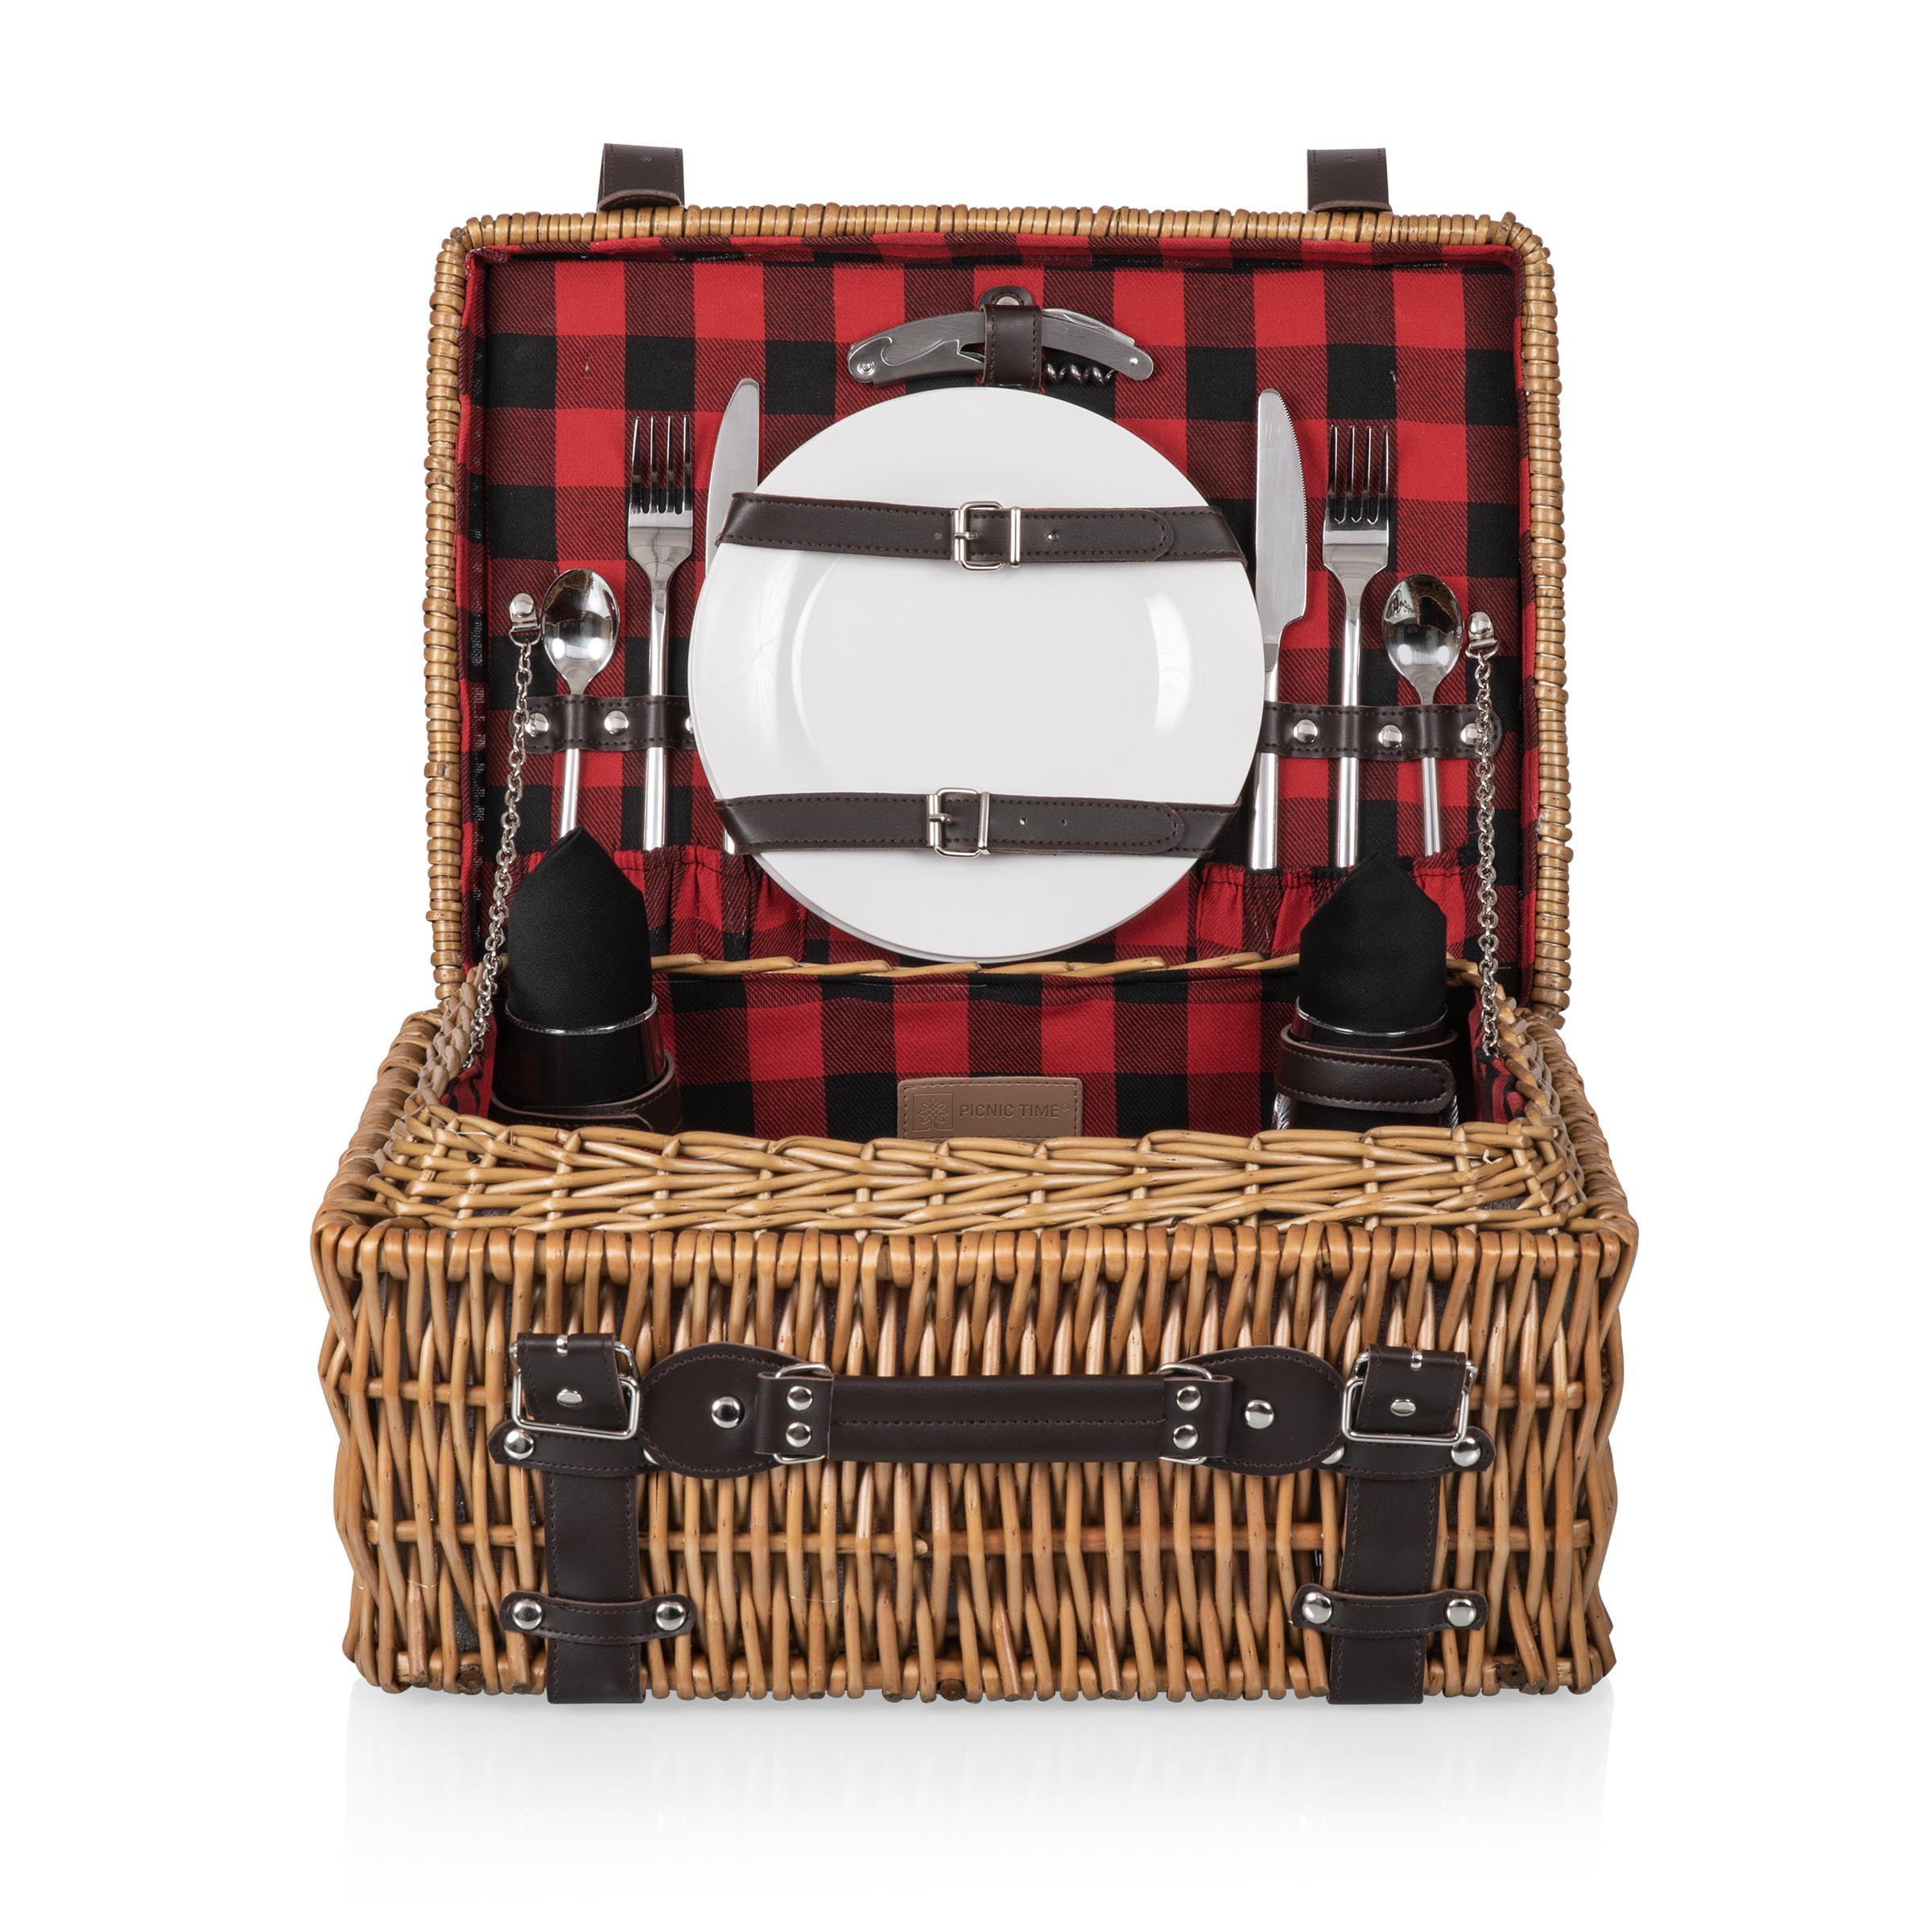 INNOSTAGE Wicker Picnic Basket for 4 Picnic Set for 4,Willow Hamper Service 